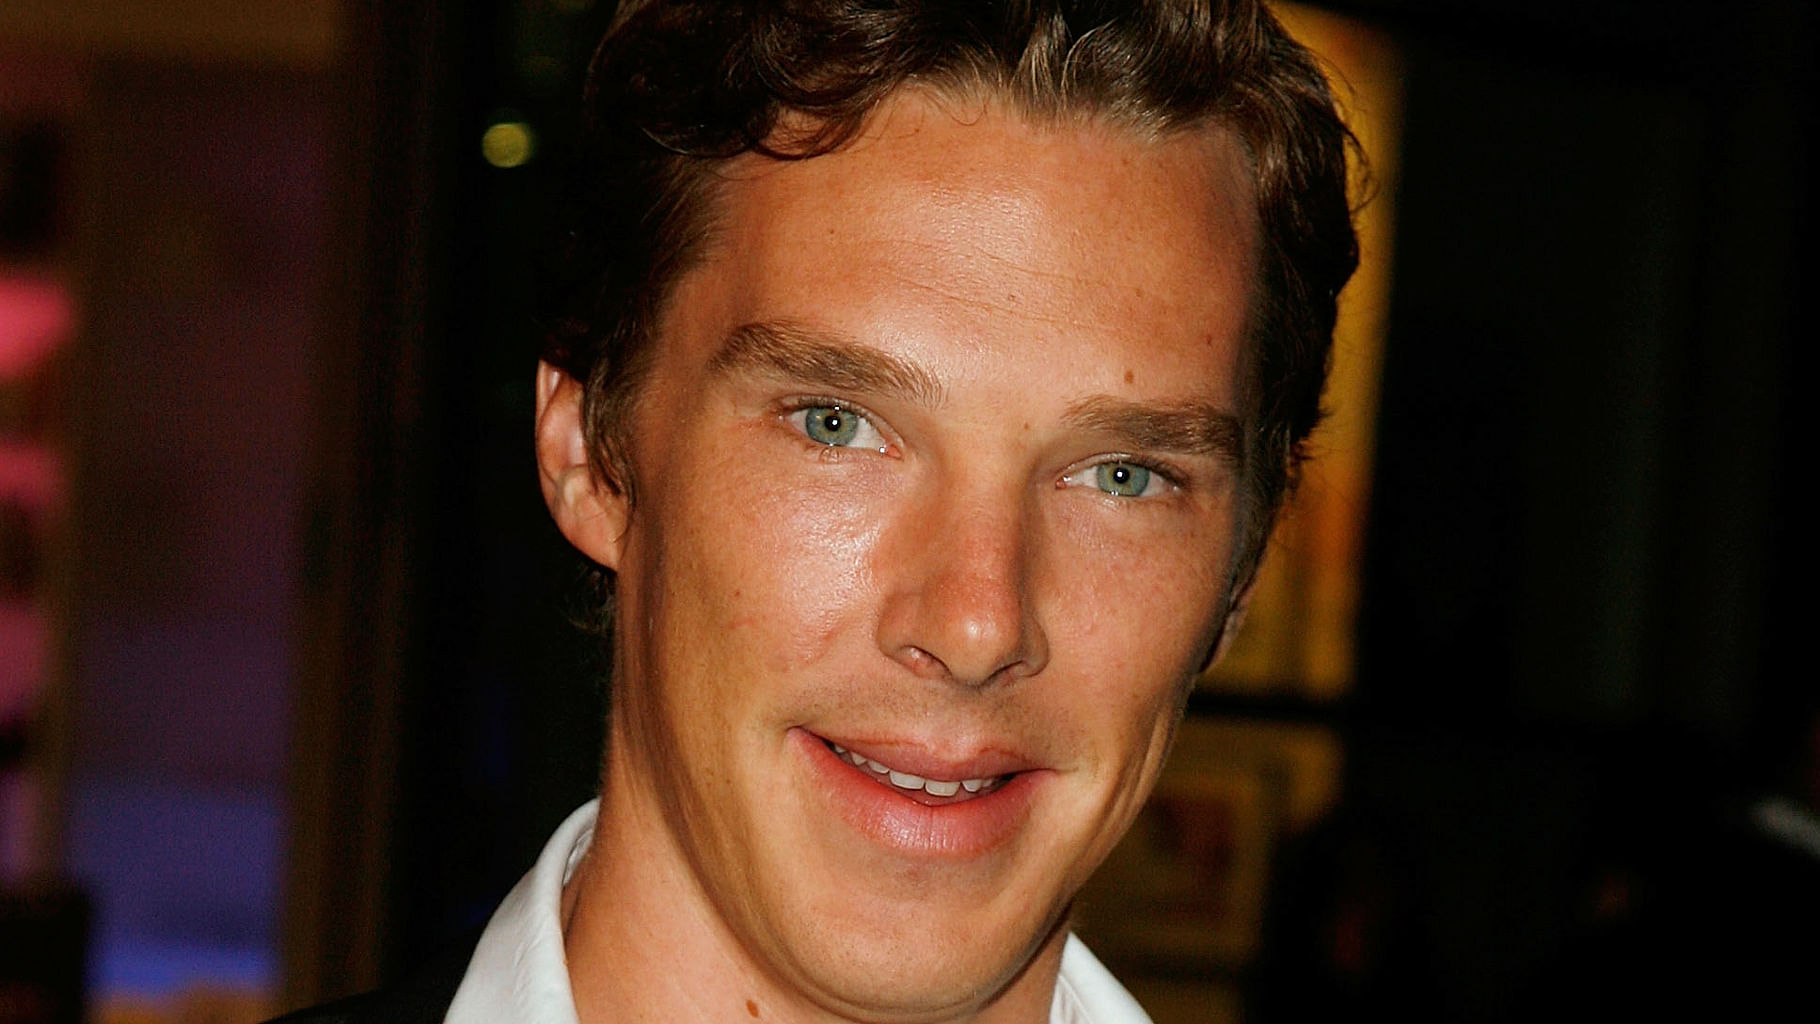 Cumberbatch is best known for his iconic portrayal of Sherlock Holmes in the British drama series <i>Sherlock. </i>(Photo: iStockphoto)